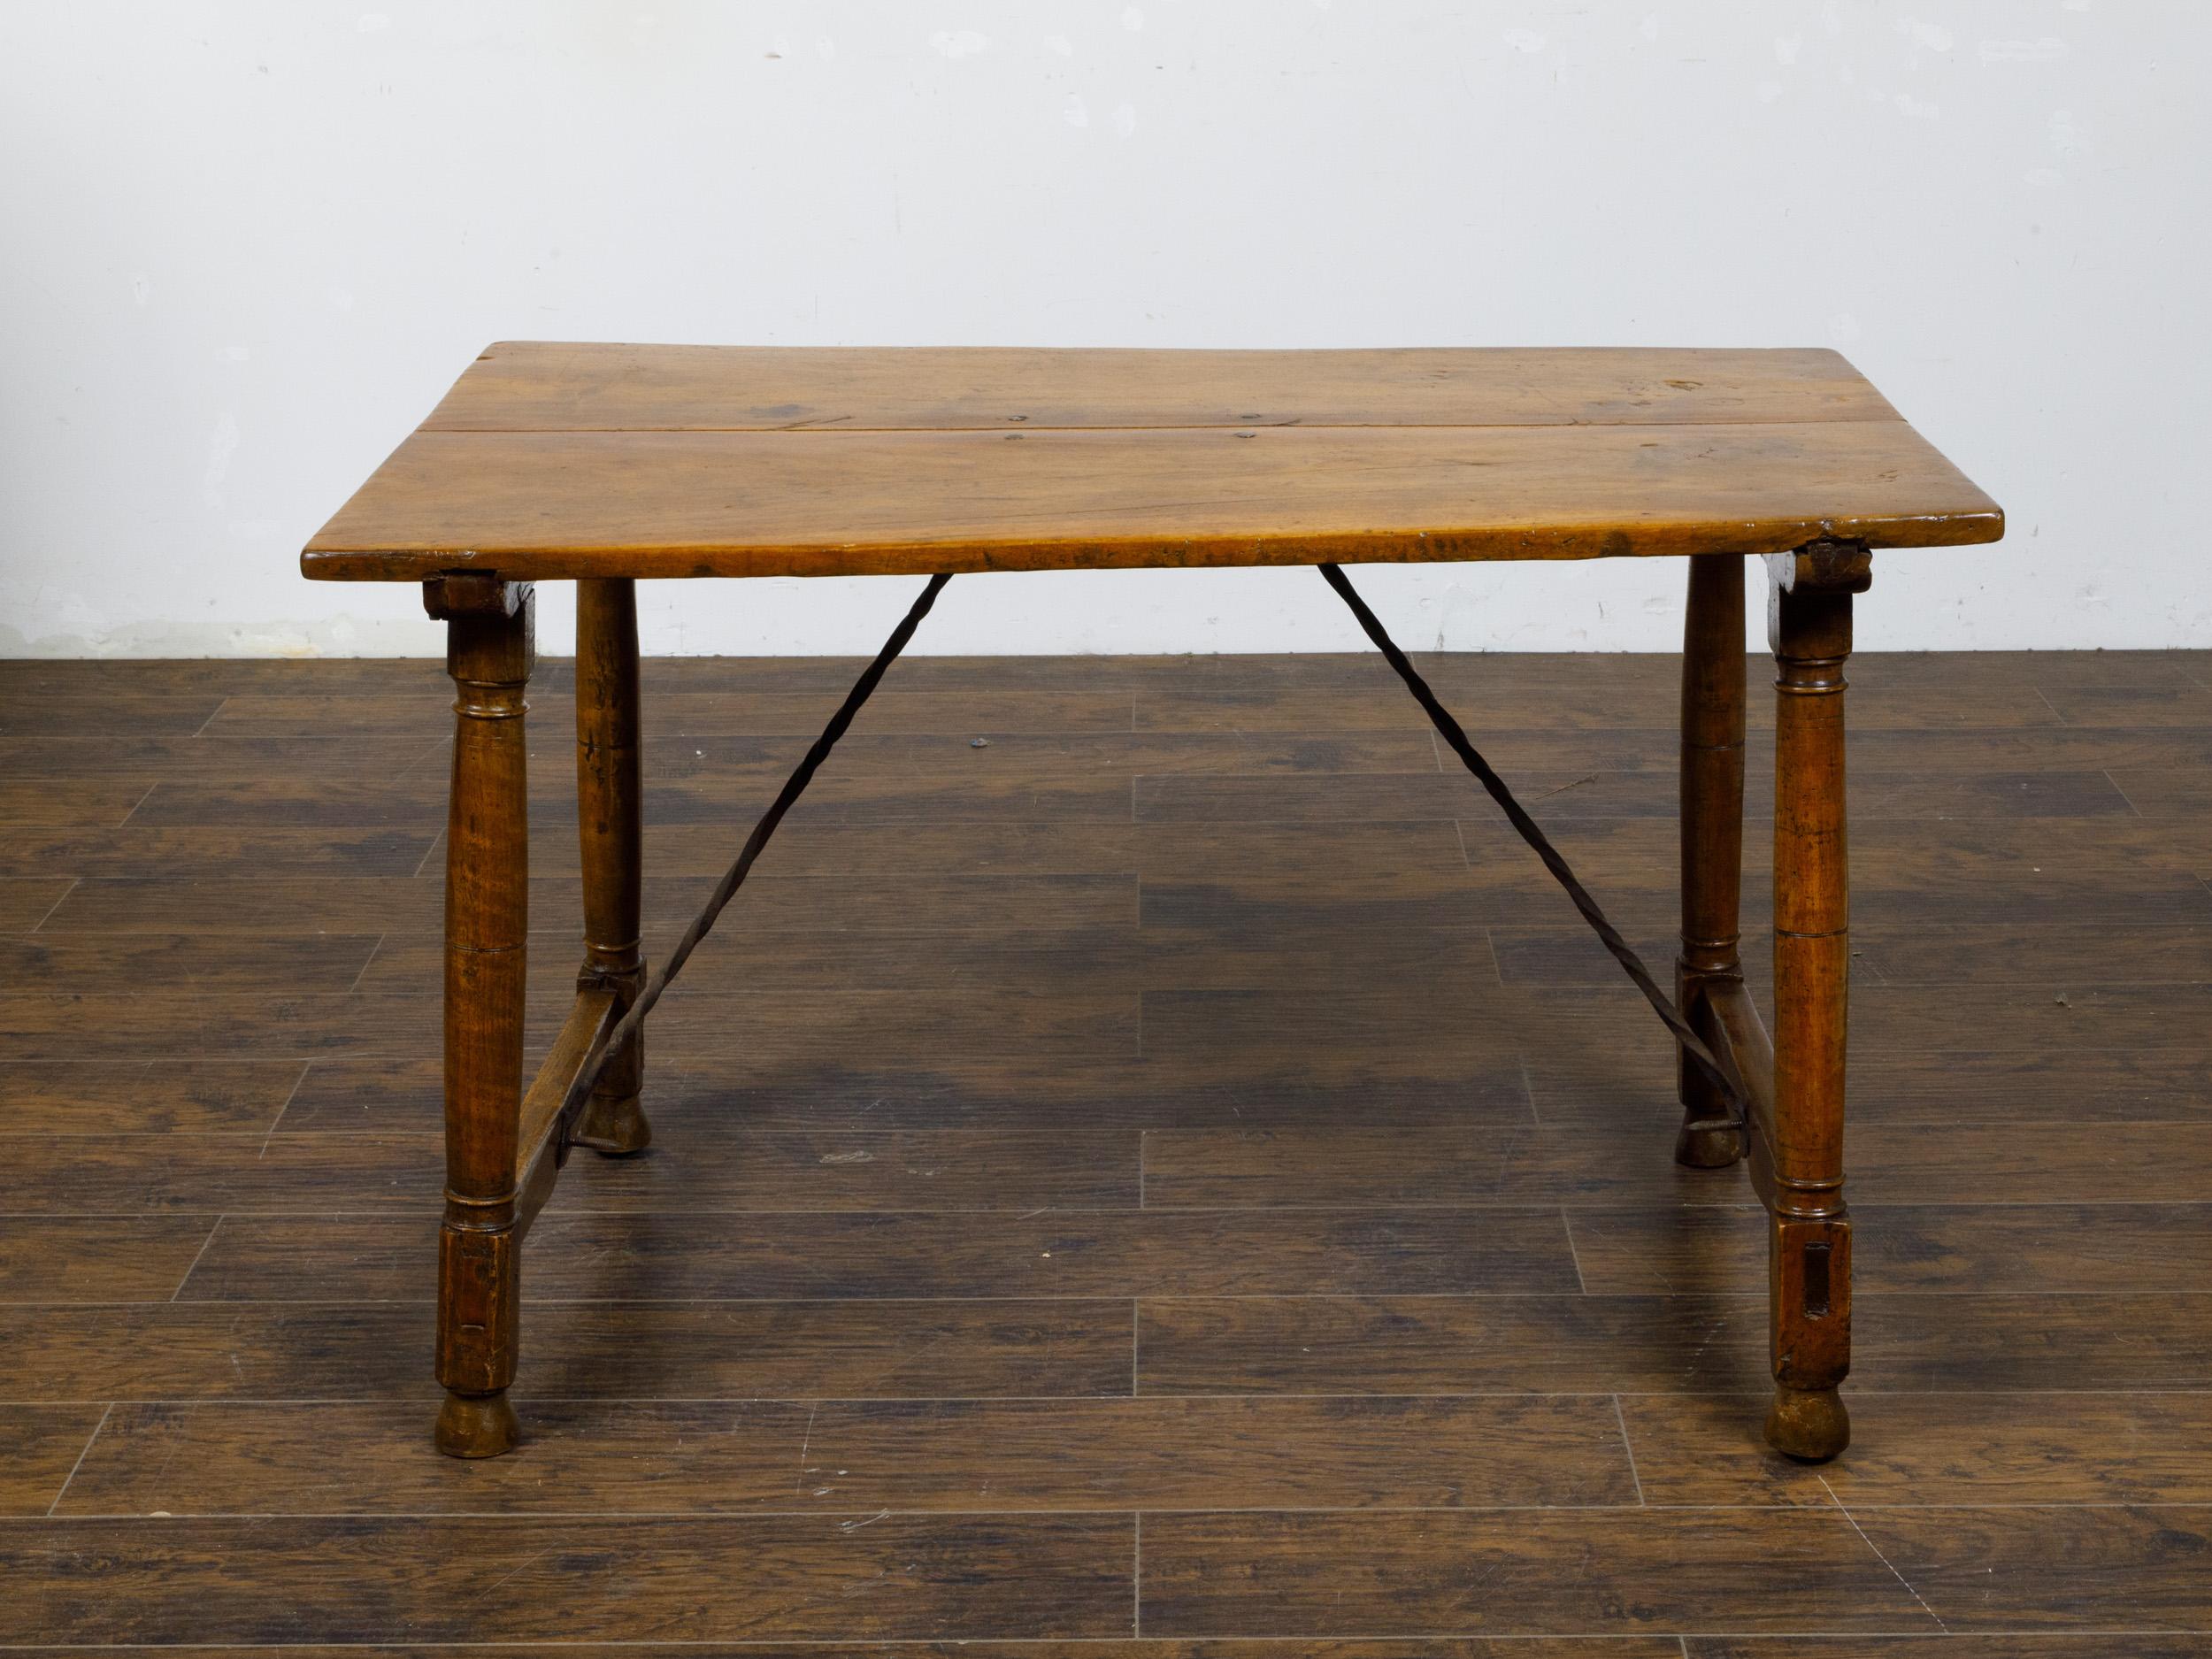 Italian 19th Century Walnut Console Table with Column Legs and Iron Stretchers For Sale 1